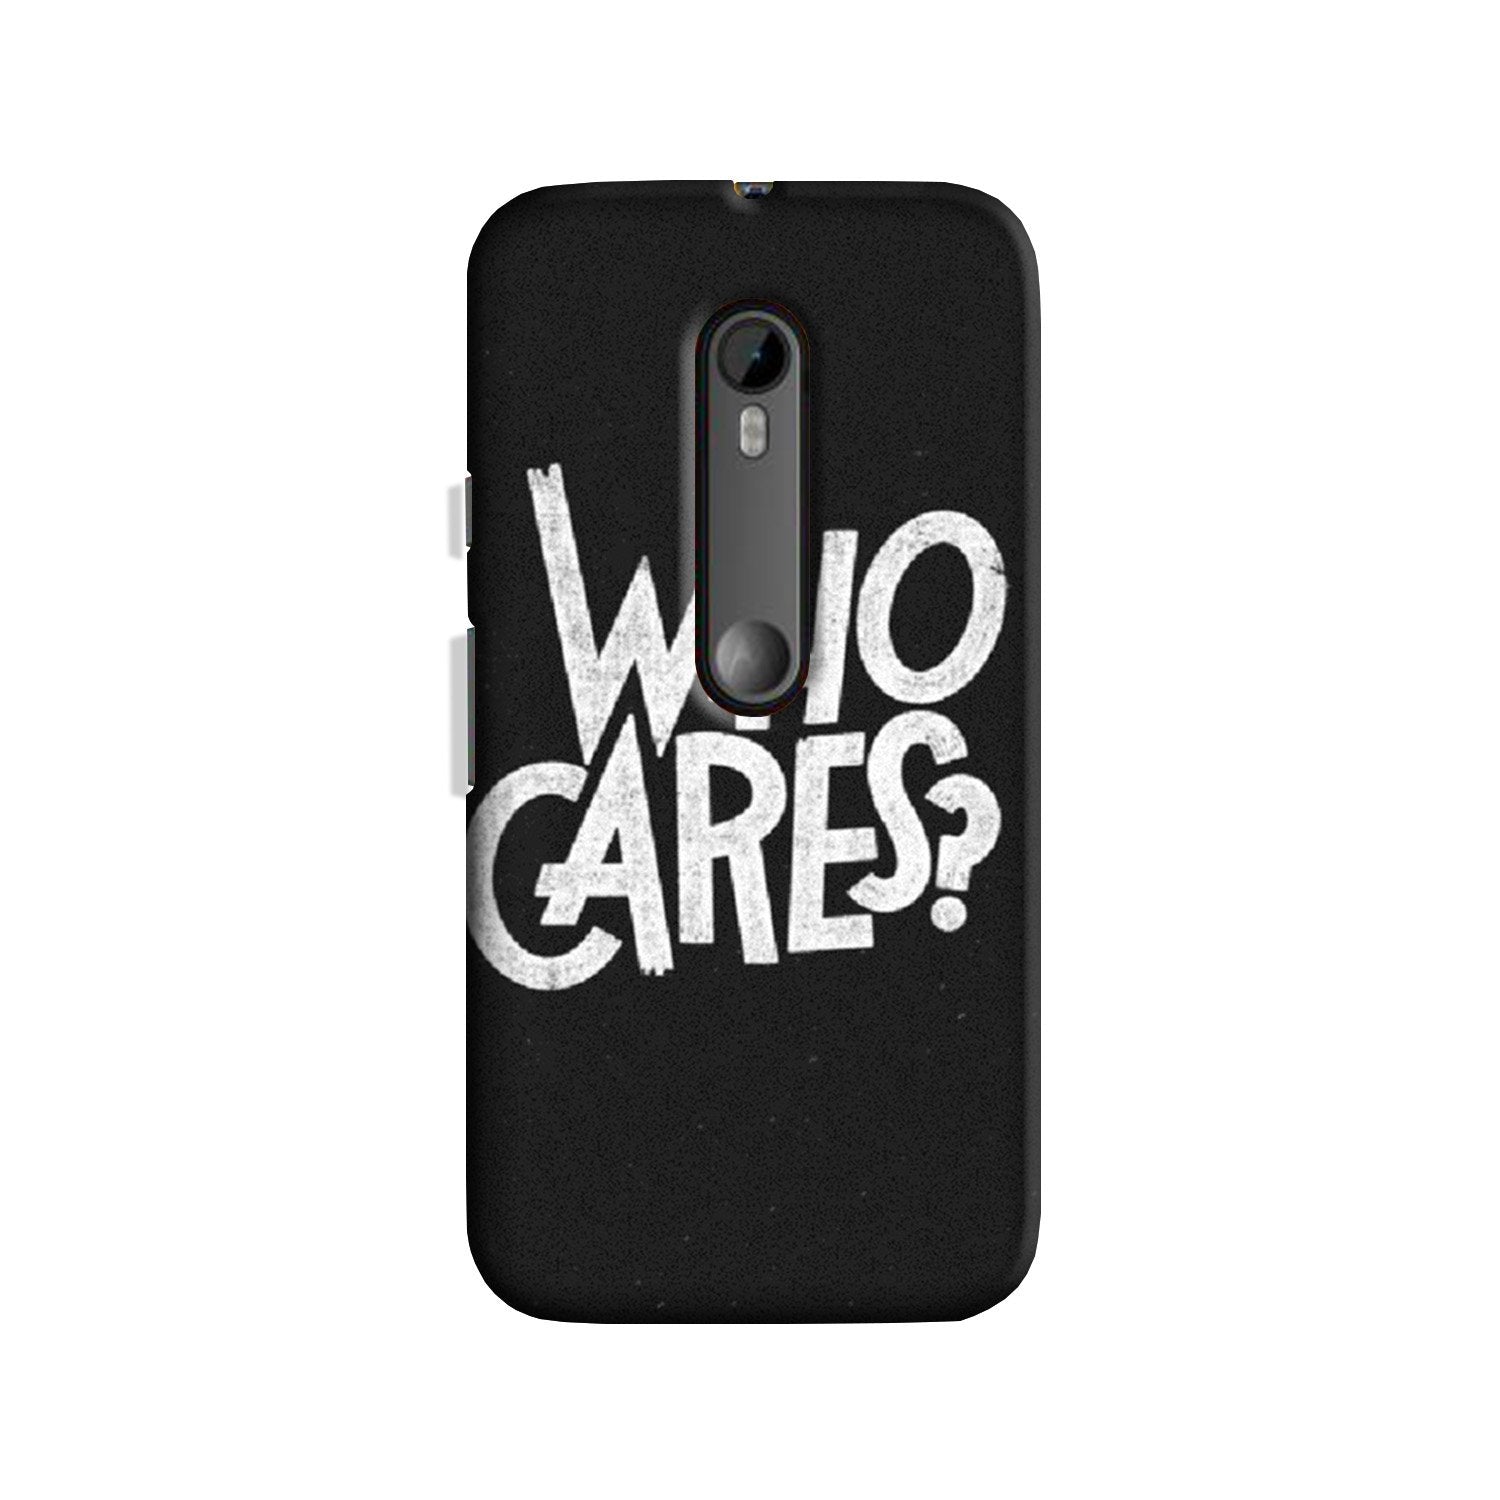 Who Cares Case for Moto G3